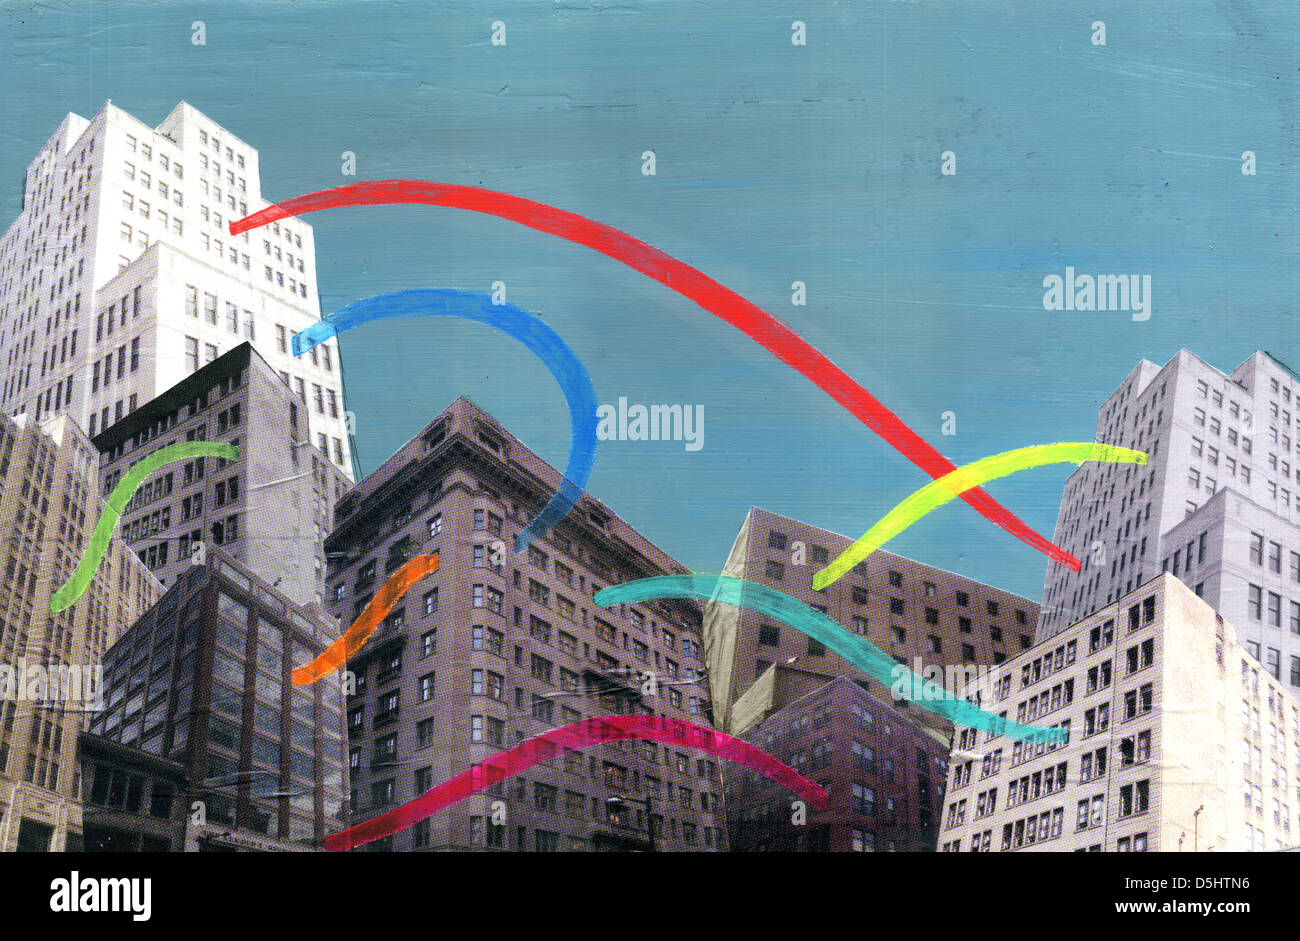 Illustration of buildings with colorful lights connecting each other representing social networking Stock Photo